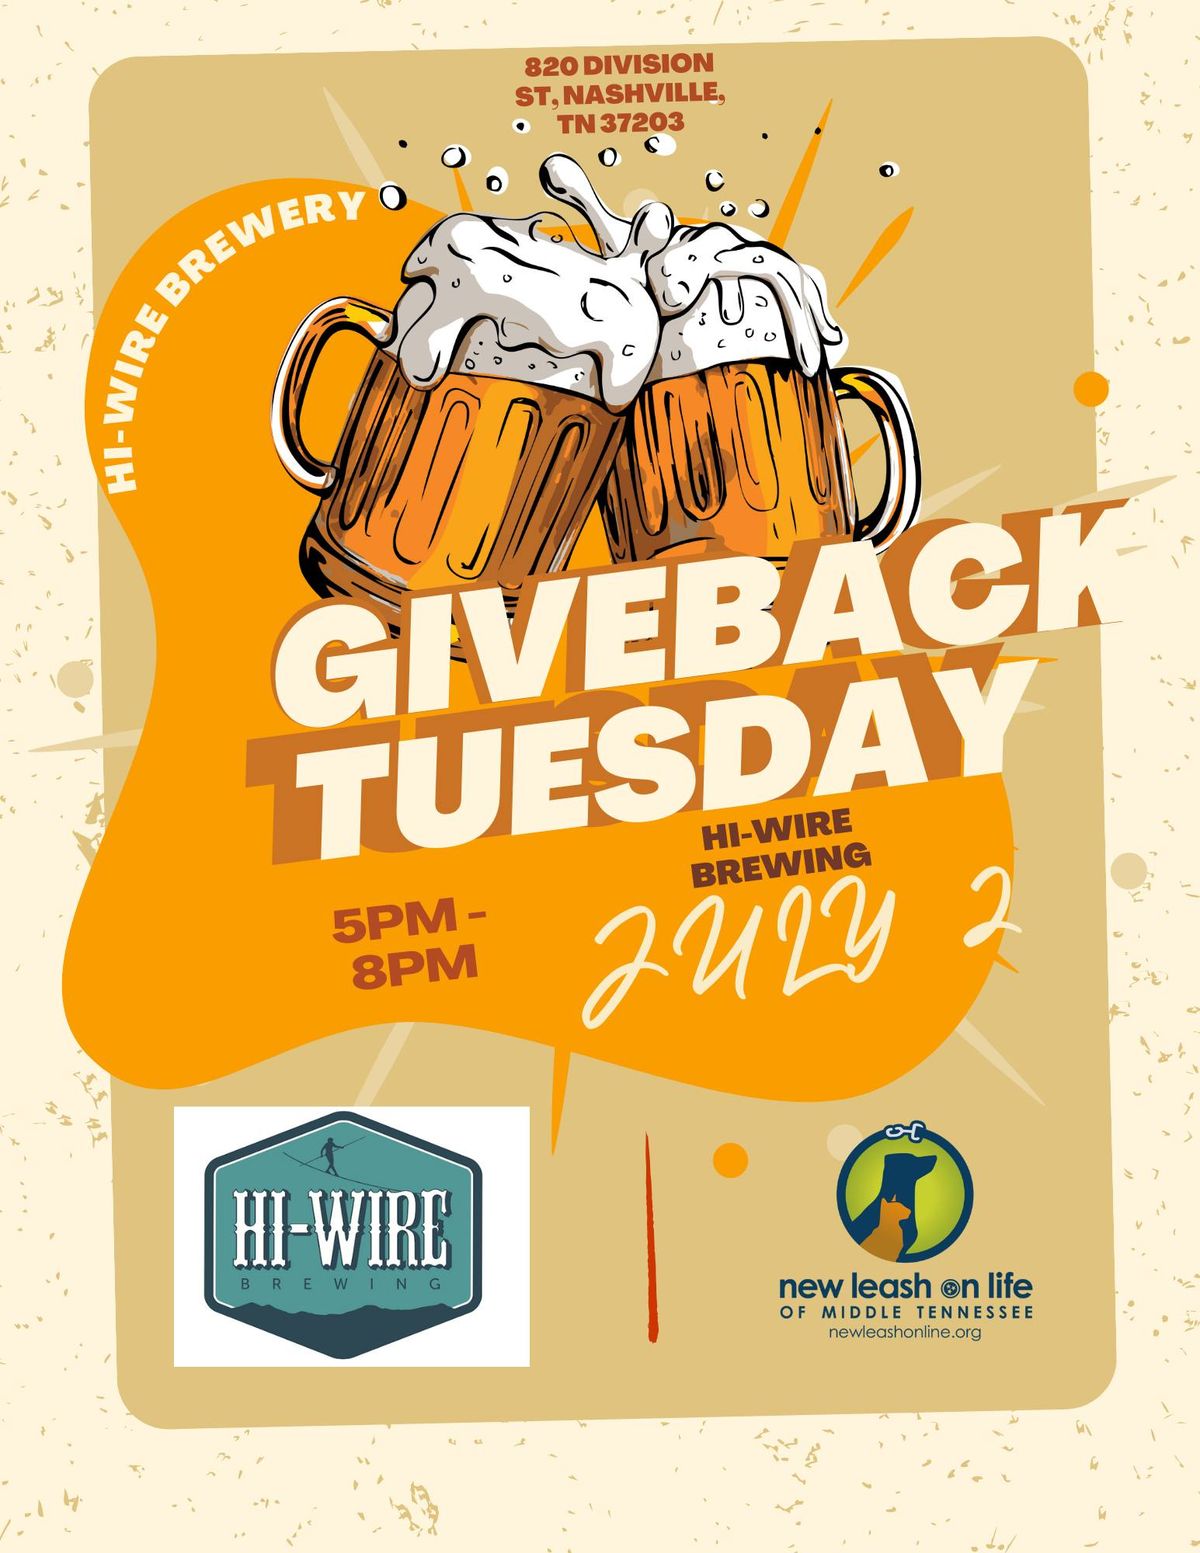 Give Back Tuesday at Hi-Wire